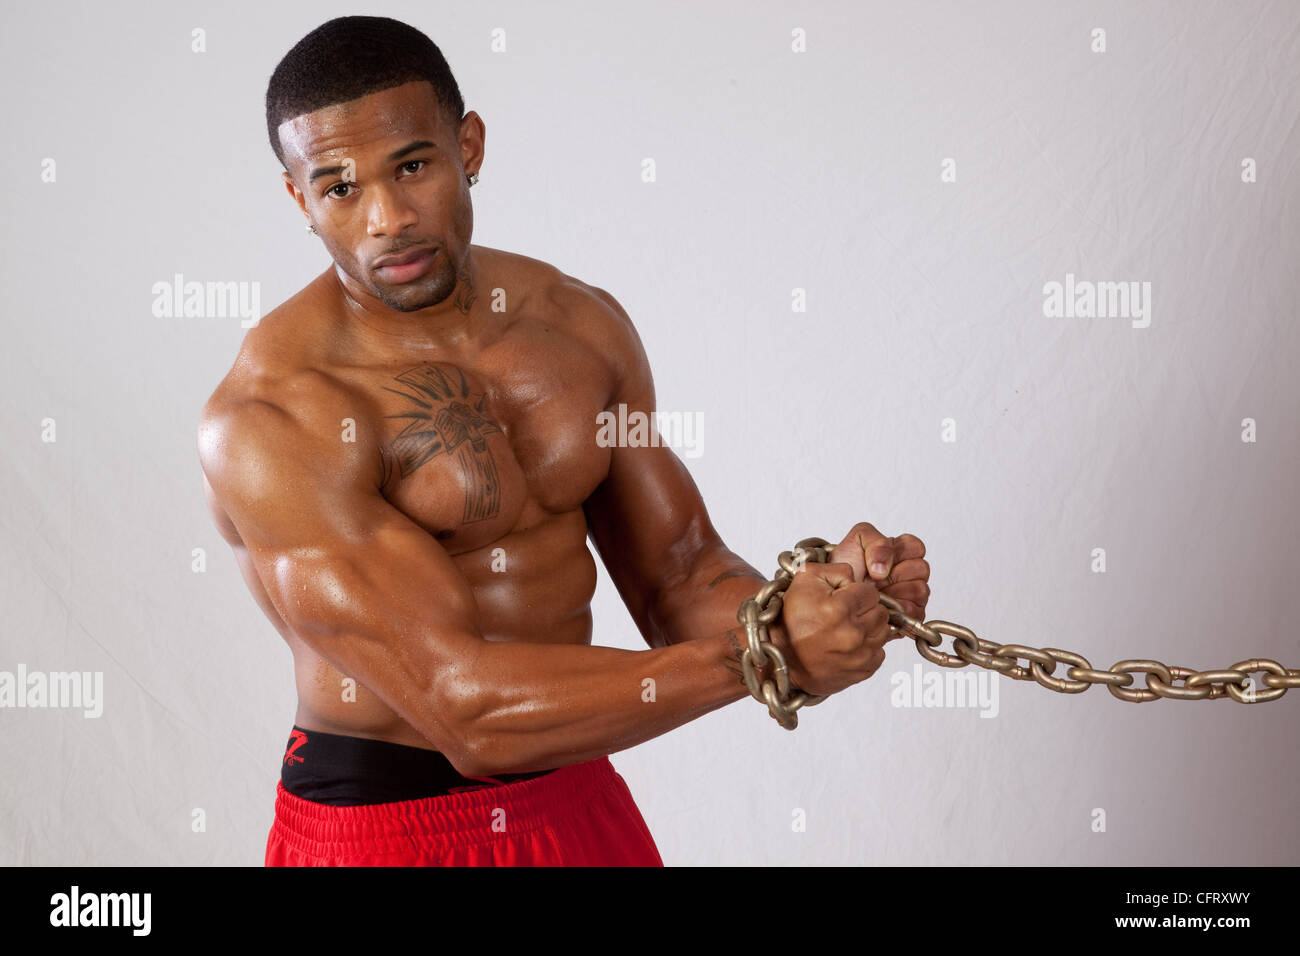 Muscular African American Black man with a heavy chain around his wrists, looking at the camera Stock Photo